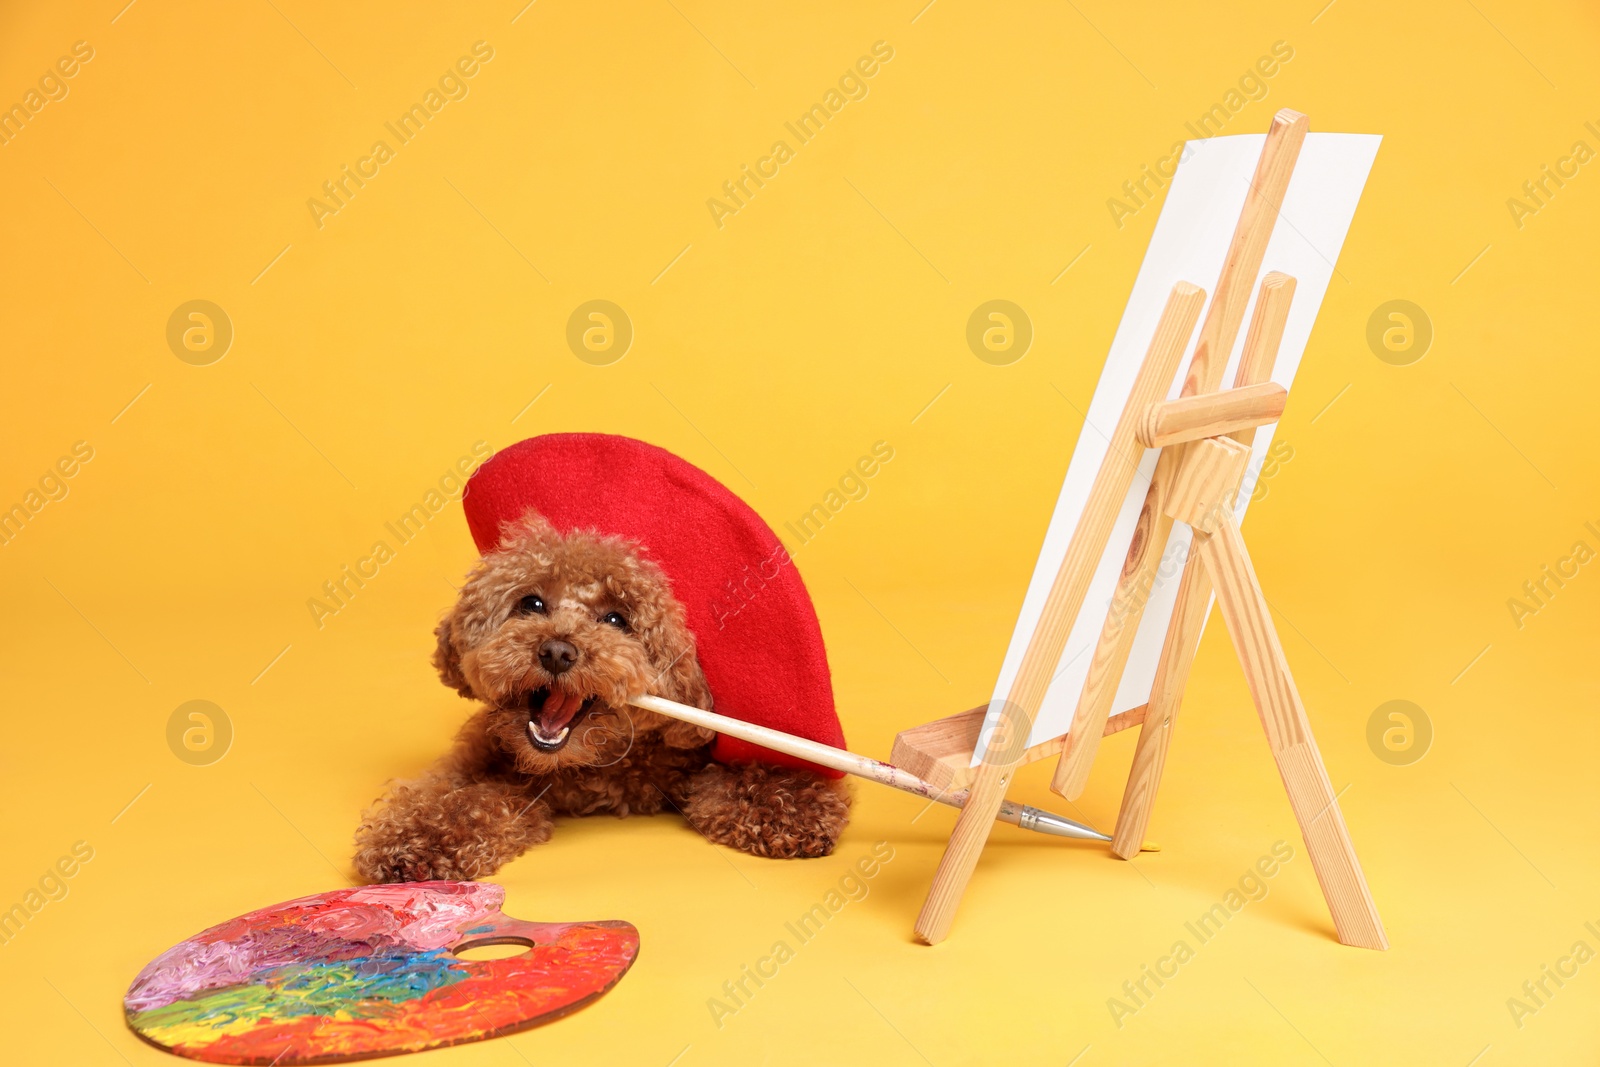 Photo of Cute Maltipoo in red beret holding brush near easel with canvas and palette on orange background. Dog artist